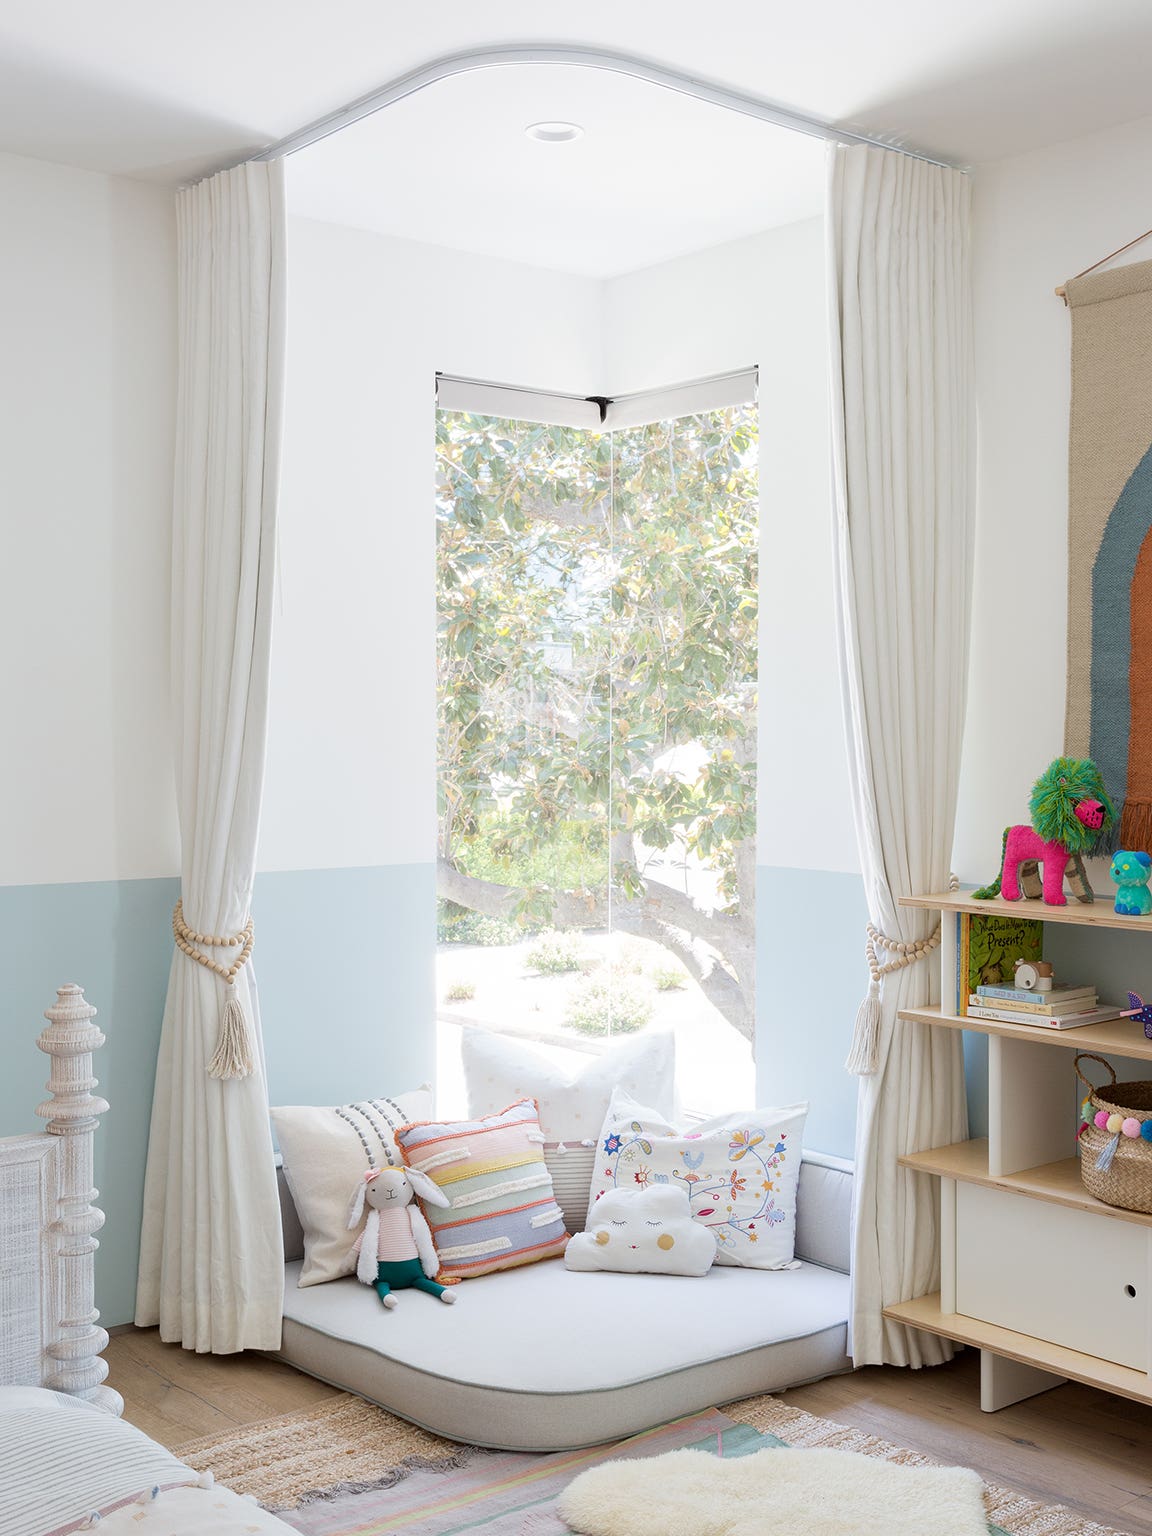 This Little Girl’s Bedroom Reading Nook Is So Cool, We Want One, Too